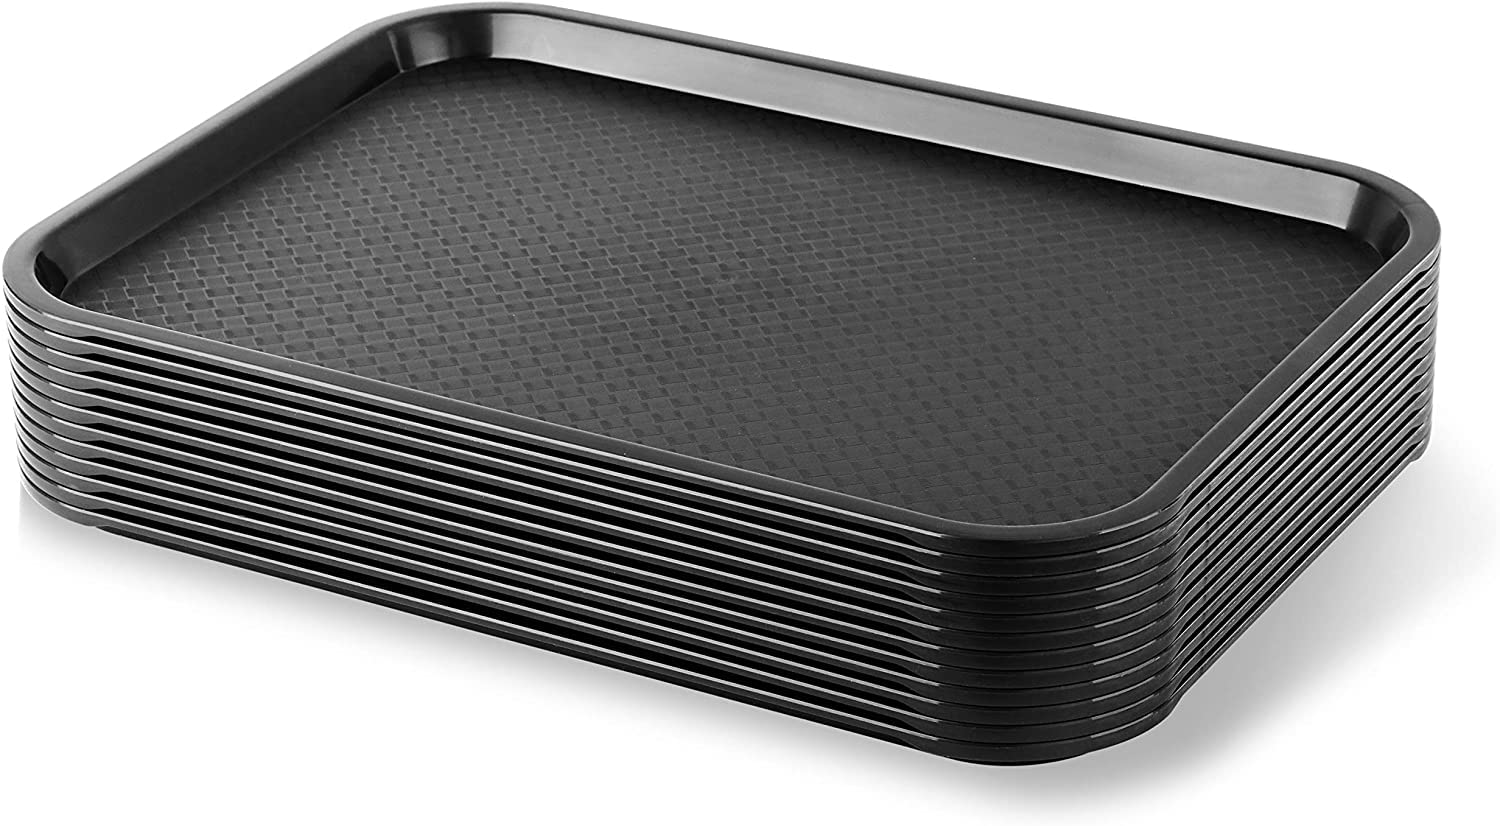 NJ Plastic Serving Platter Large Tray Unbreakable Snacks Tea Serving Tray Black Drink Breakfast Tea Dinner Coffee Salad Food for Dinning Table Home Kitchen (16 X 12 Inches) : 8 Pcs.